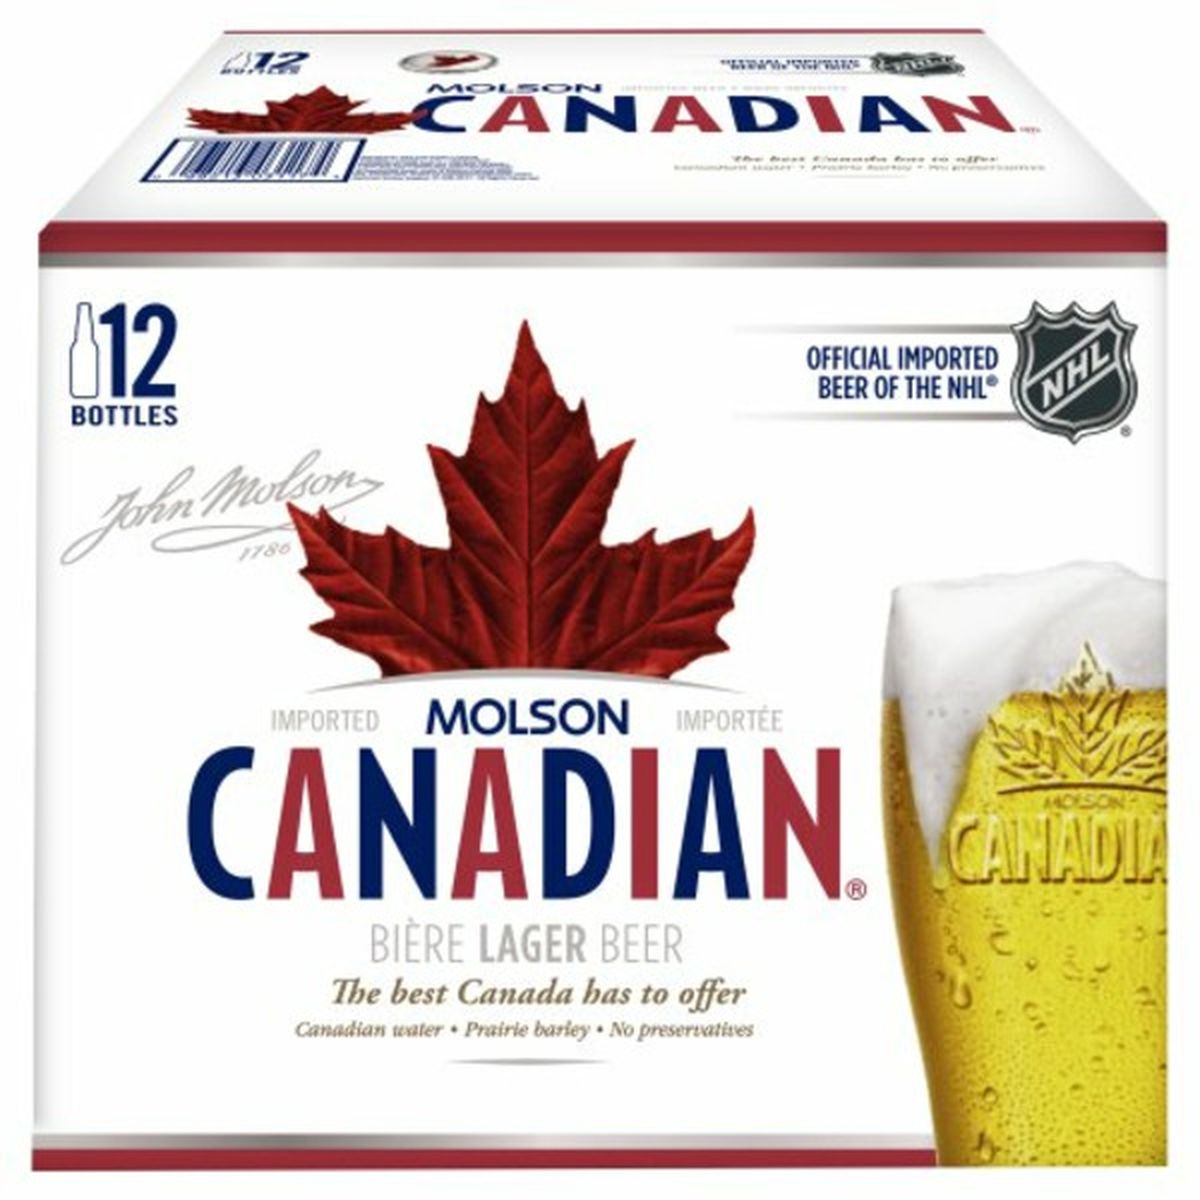 Calories in Molson Canadian Canadian 12/12 oz bottles